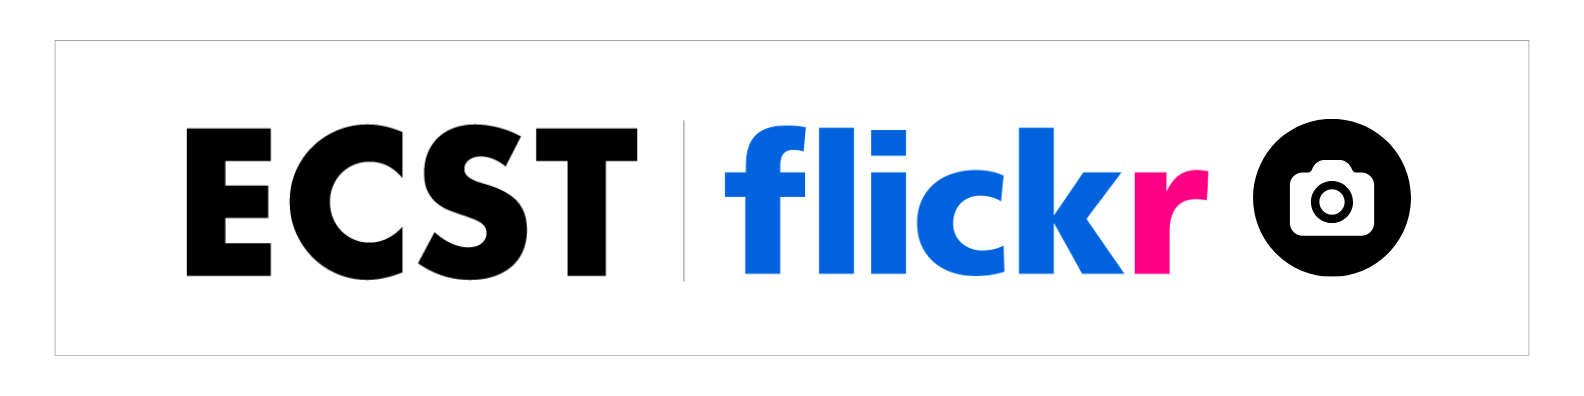 ecst flickr with camera icon